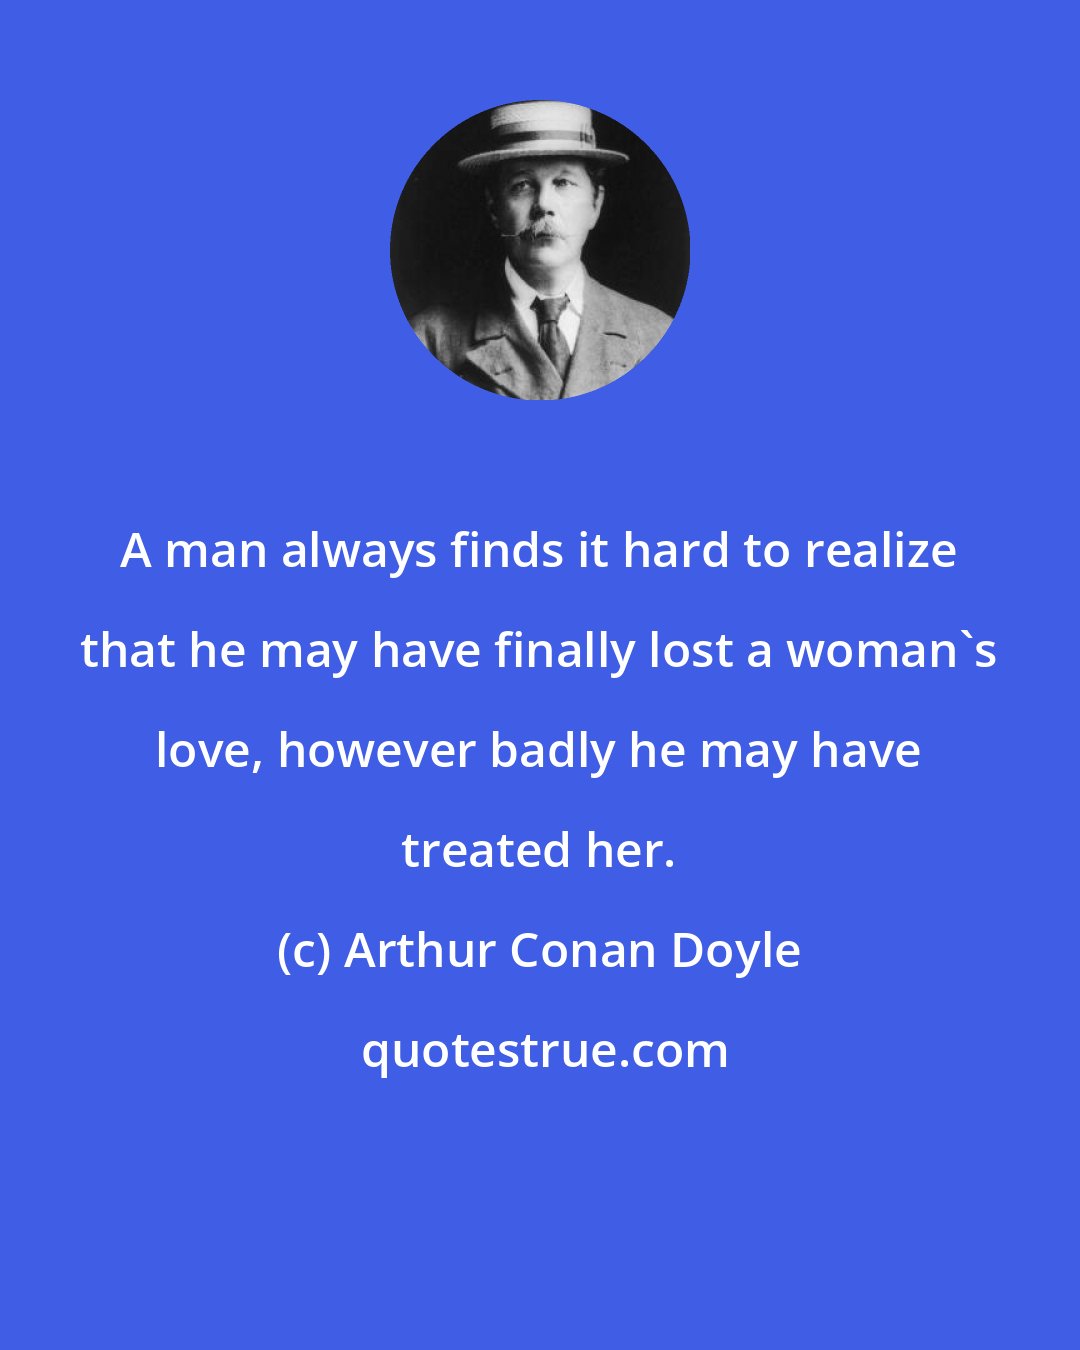 Arthur Conan Doyle: A man always finds it hard to realize that he may have finally lost a woman's love, however badly he may have treated her.